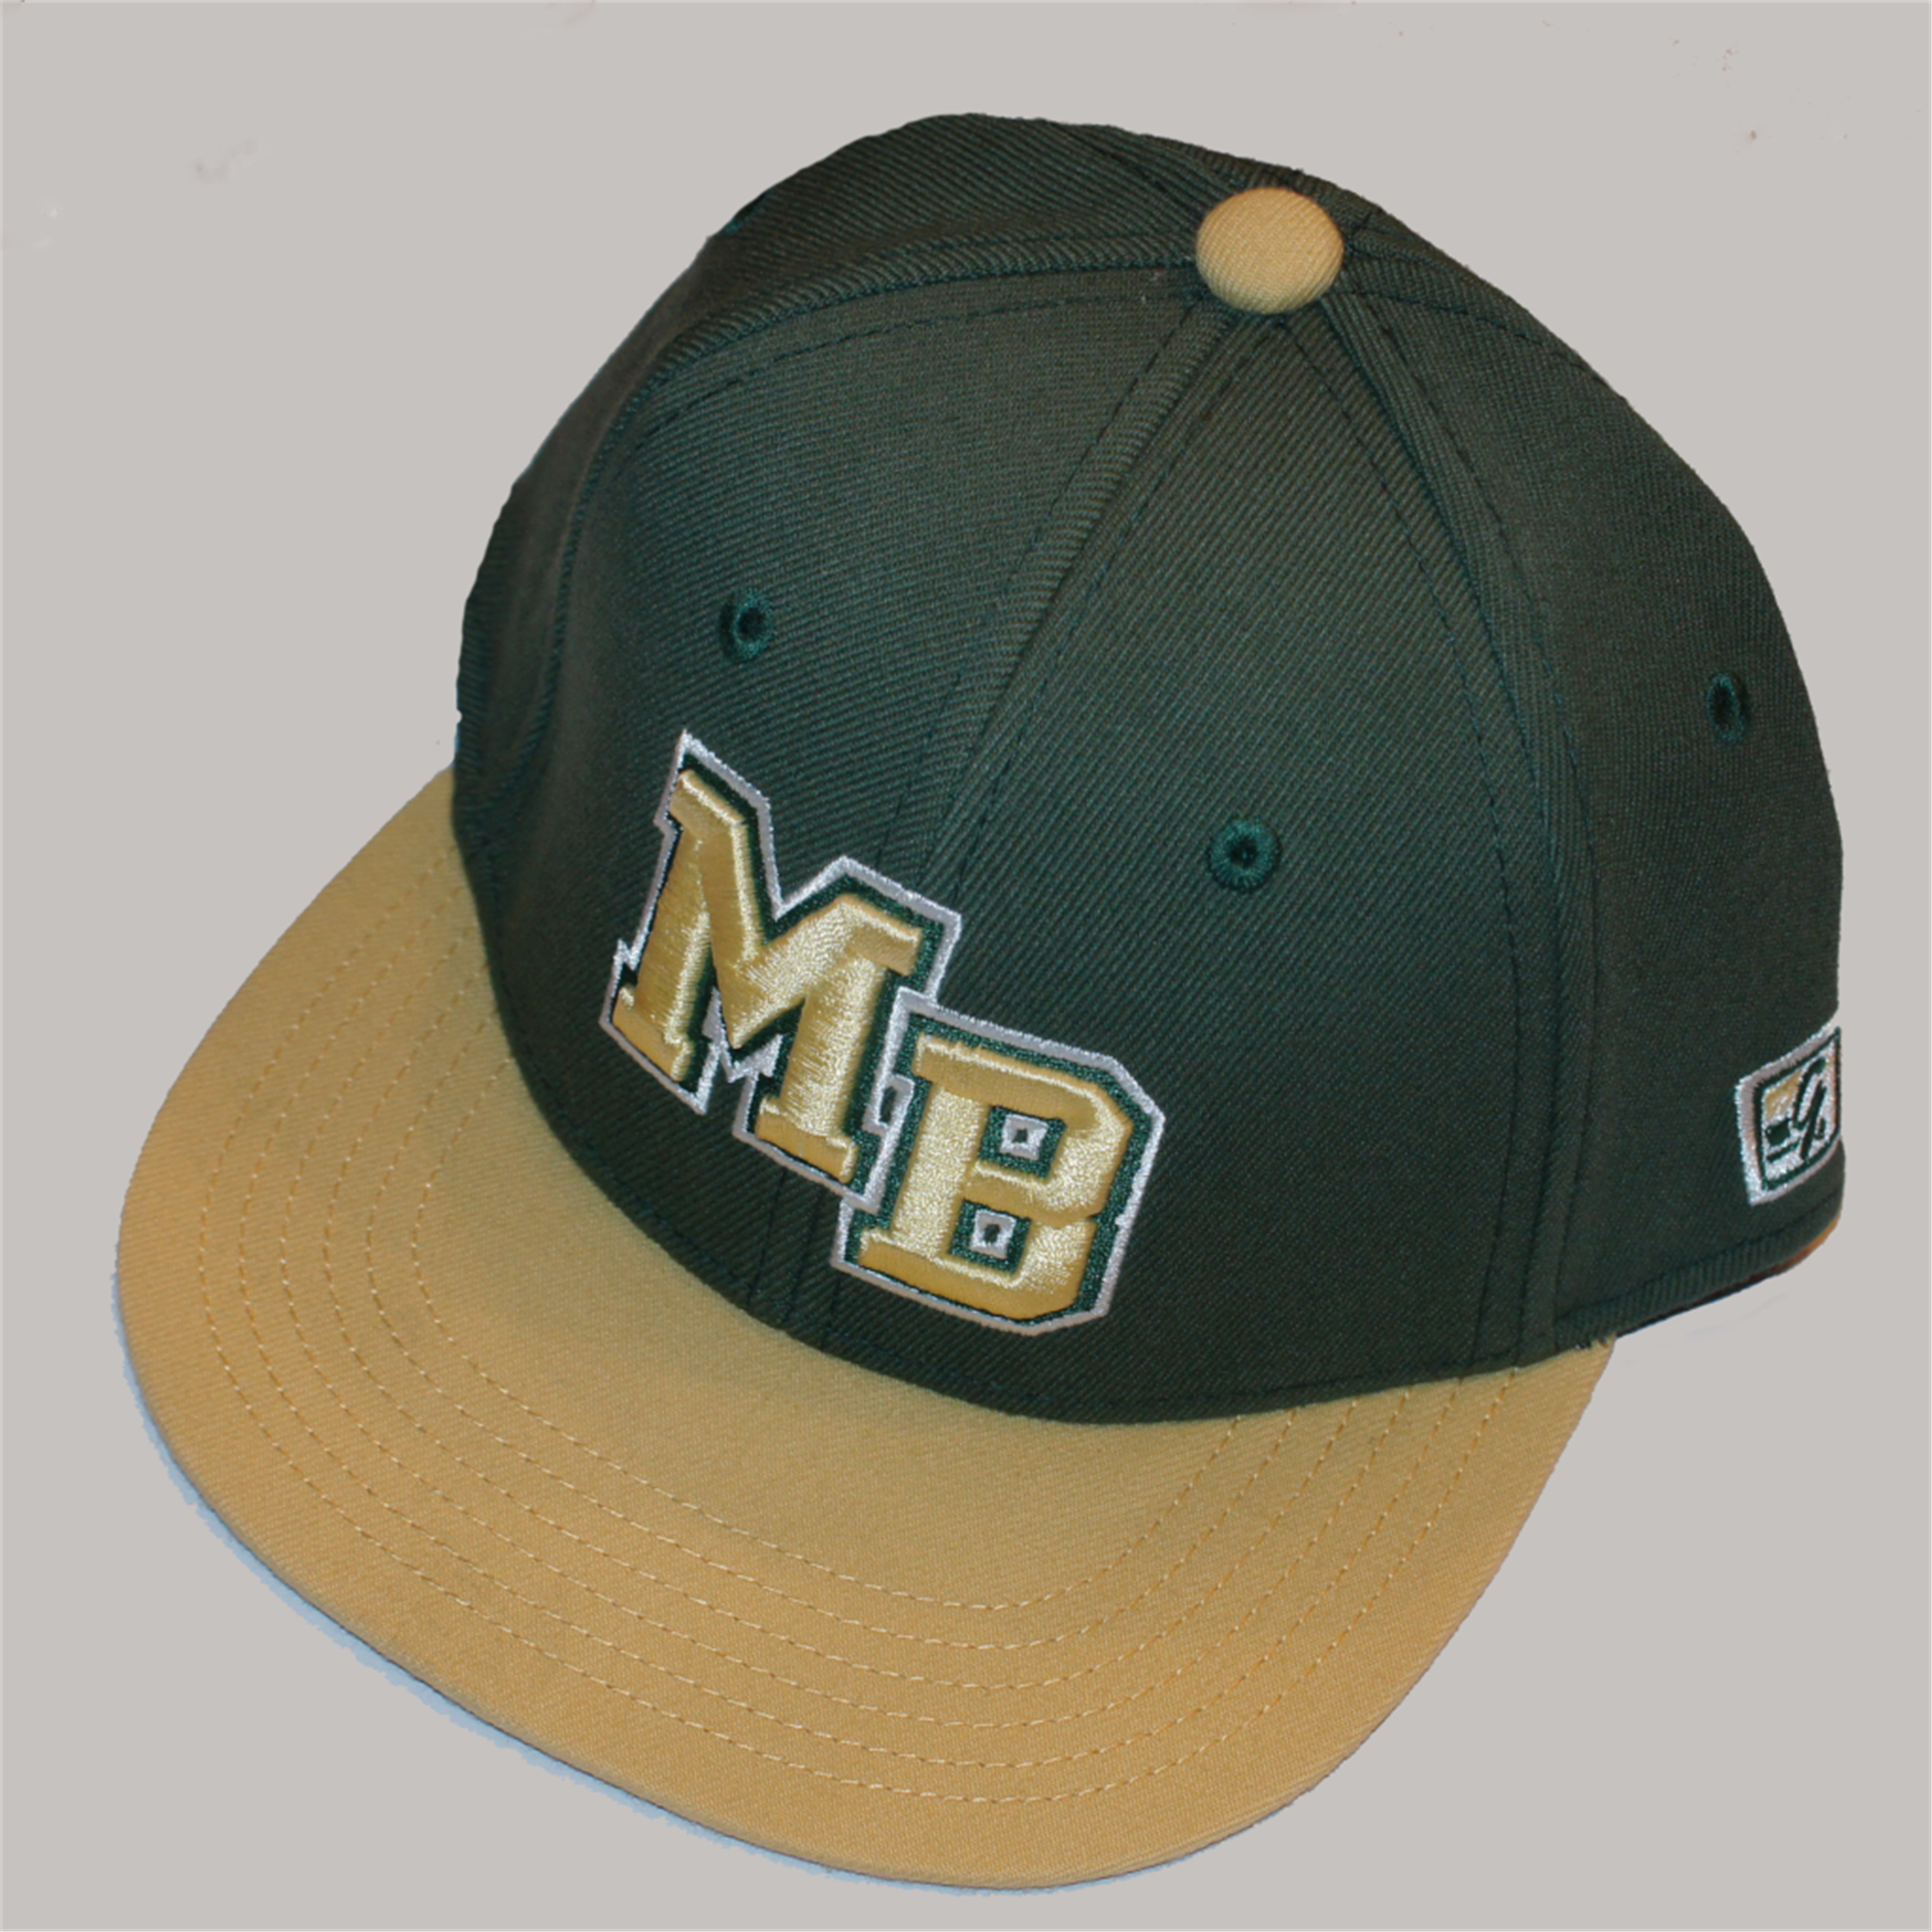 Green and Gold Hat with MB